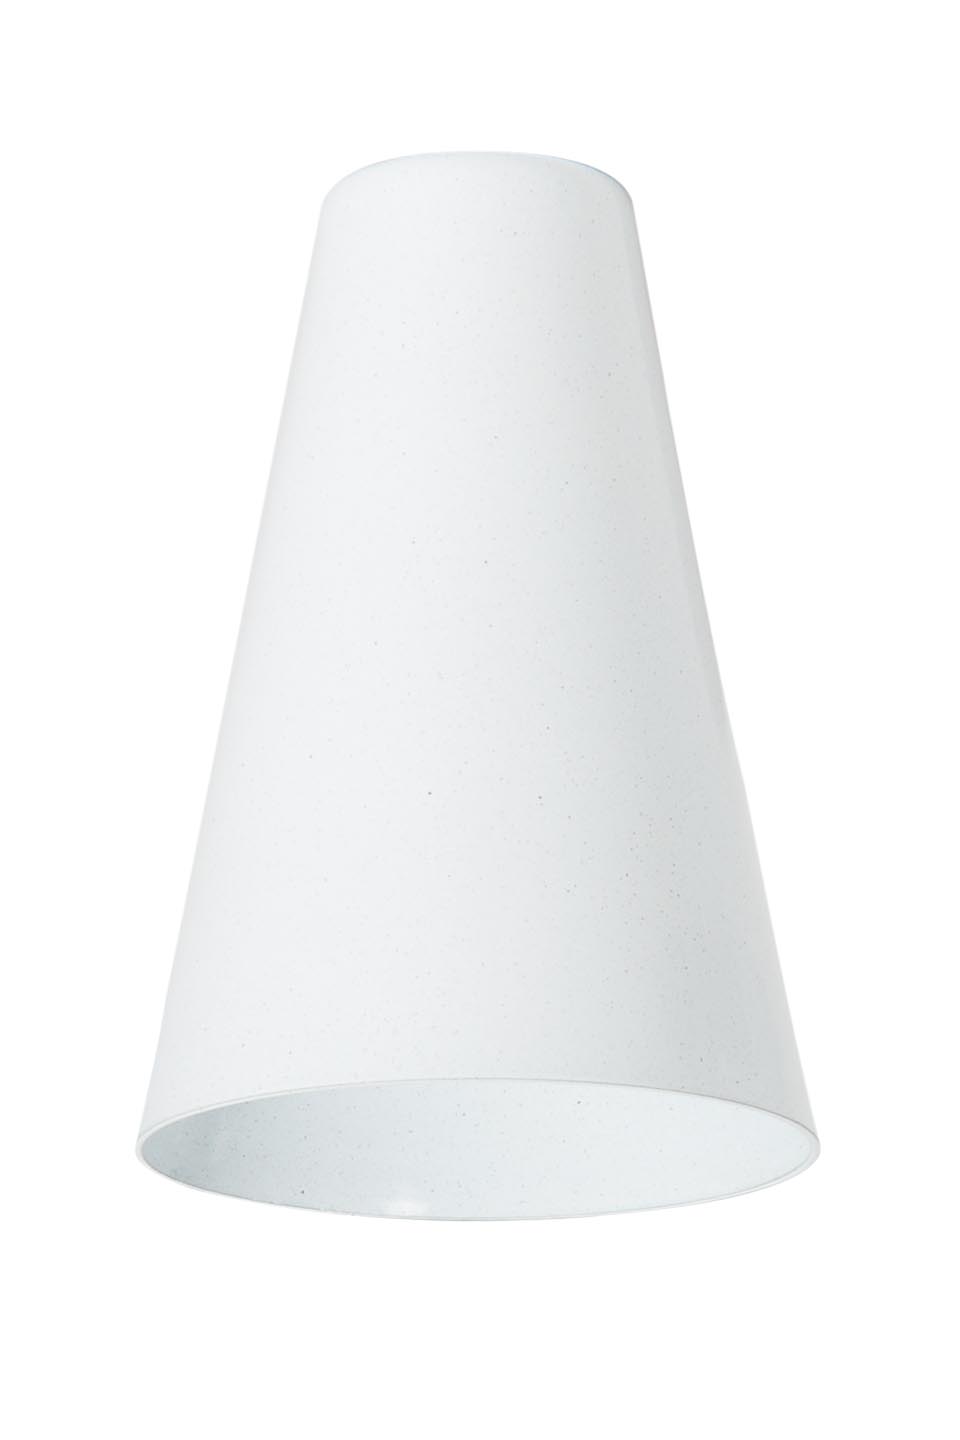 3-3/8 Tall Glossy White Finish Brass Cone Socket Cup, 1/8 IP Slip ...